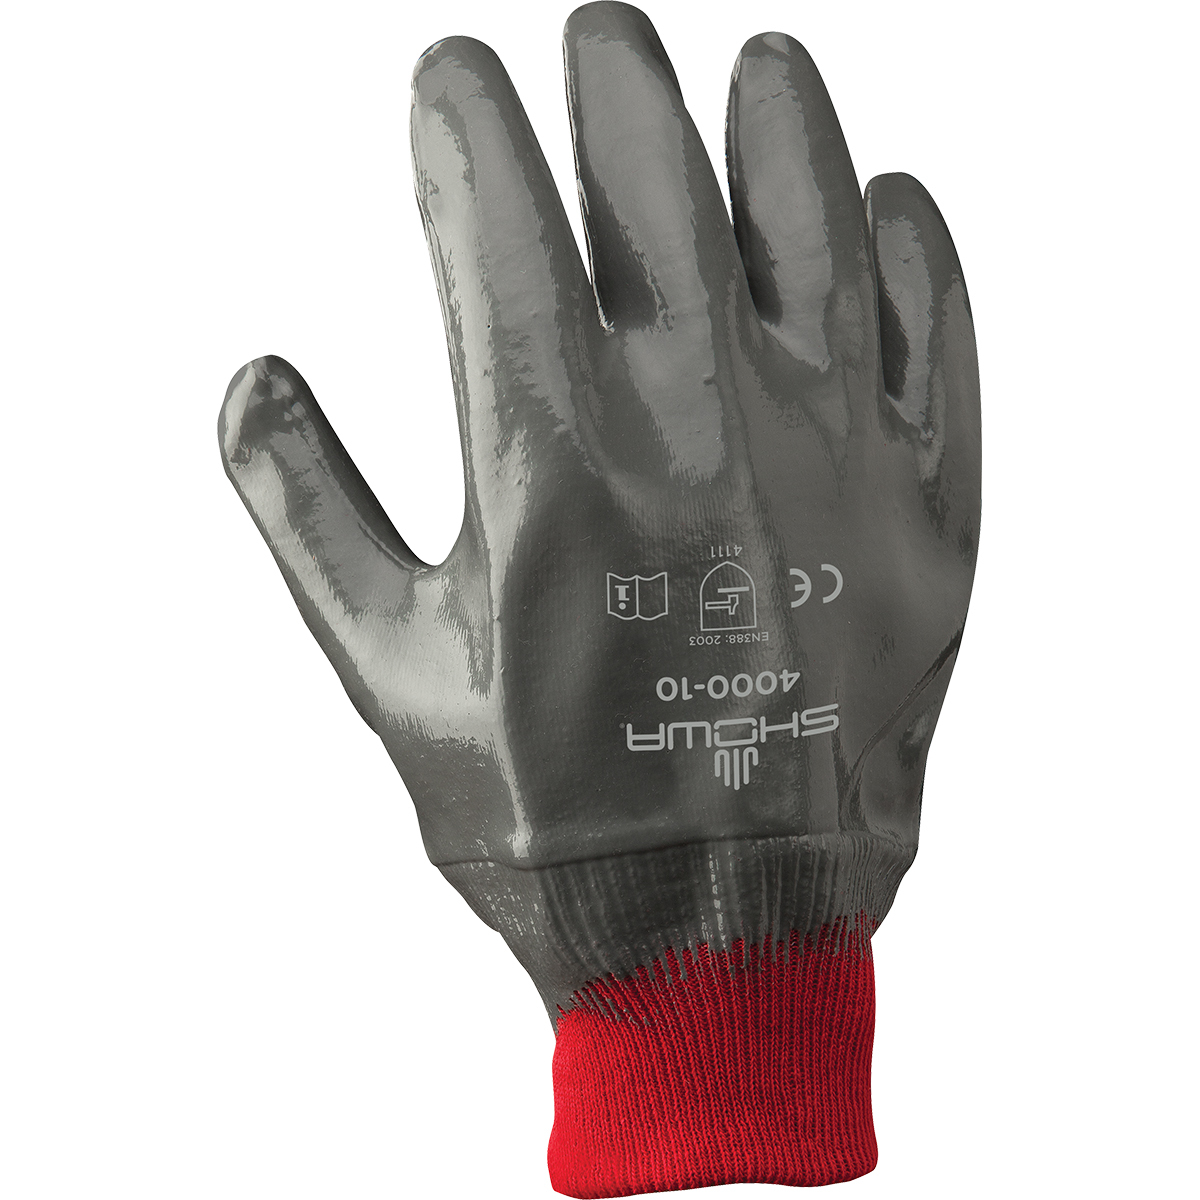 SHOWA® Light Weight Nitrile Palm Coated Work Gloves With Cotton Liner And Knit Wrist